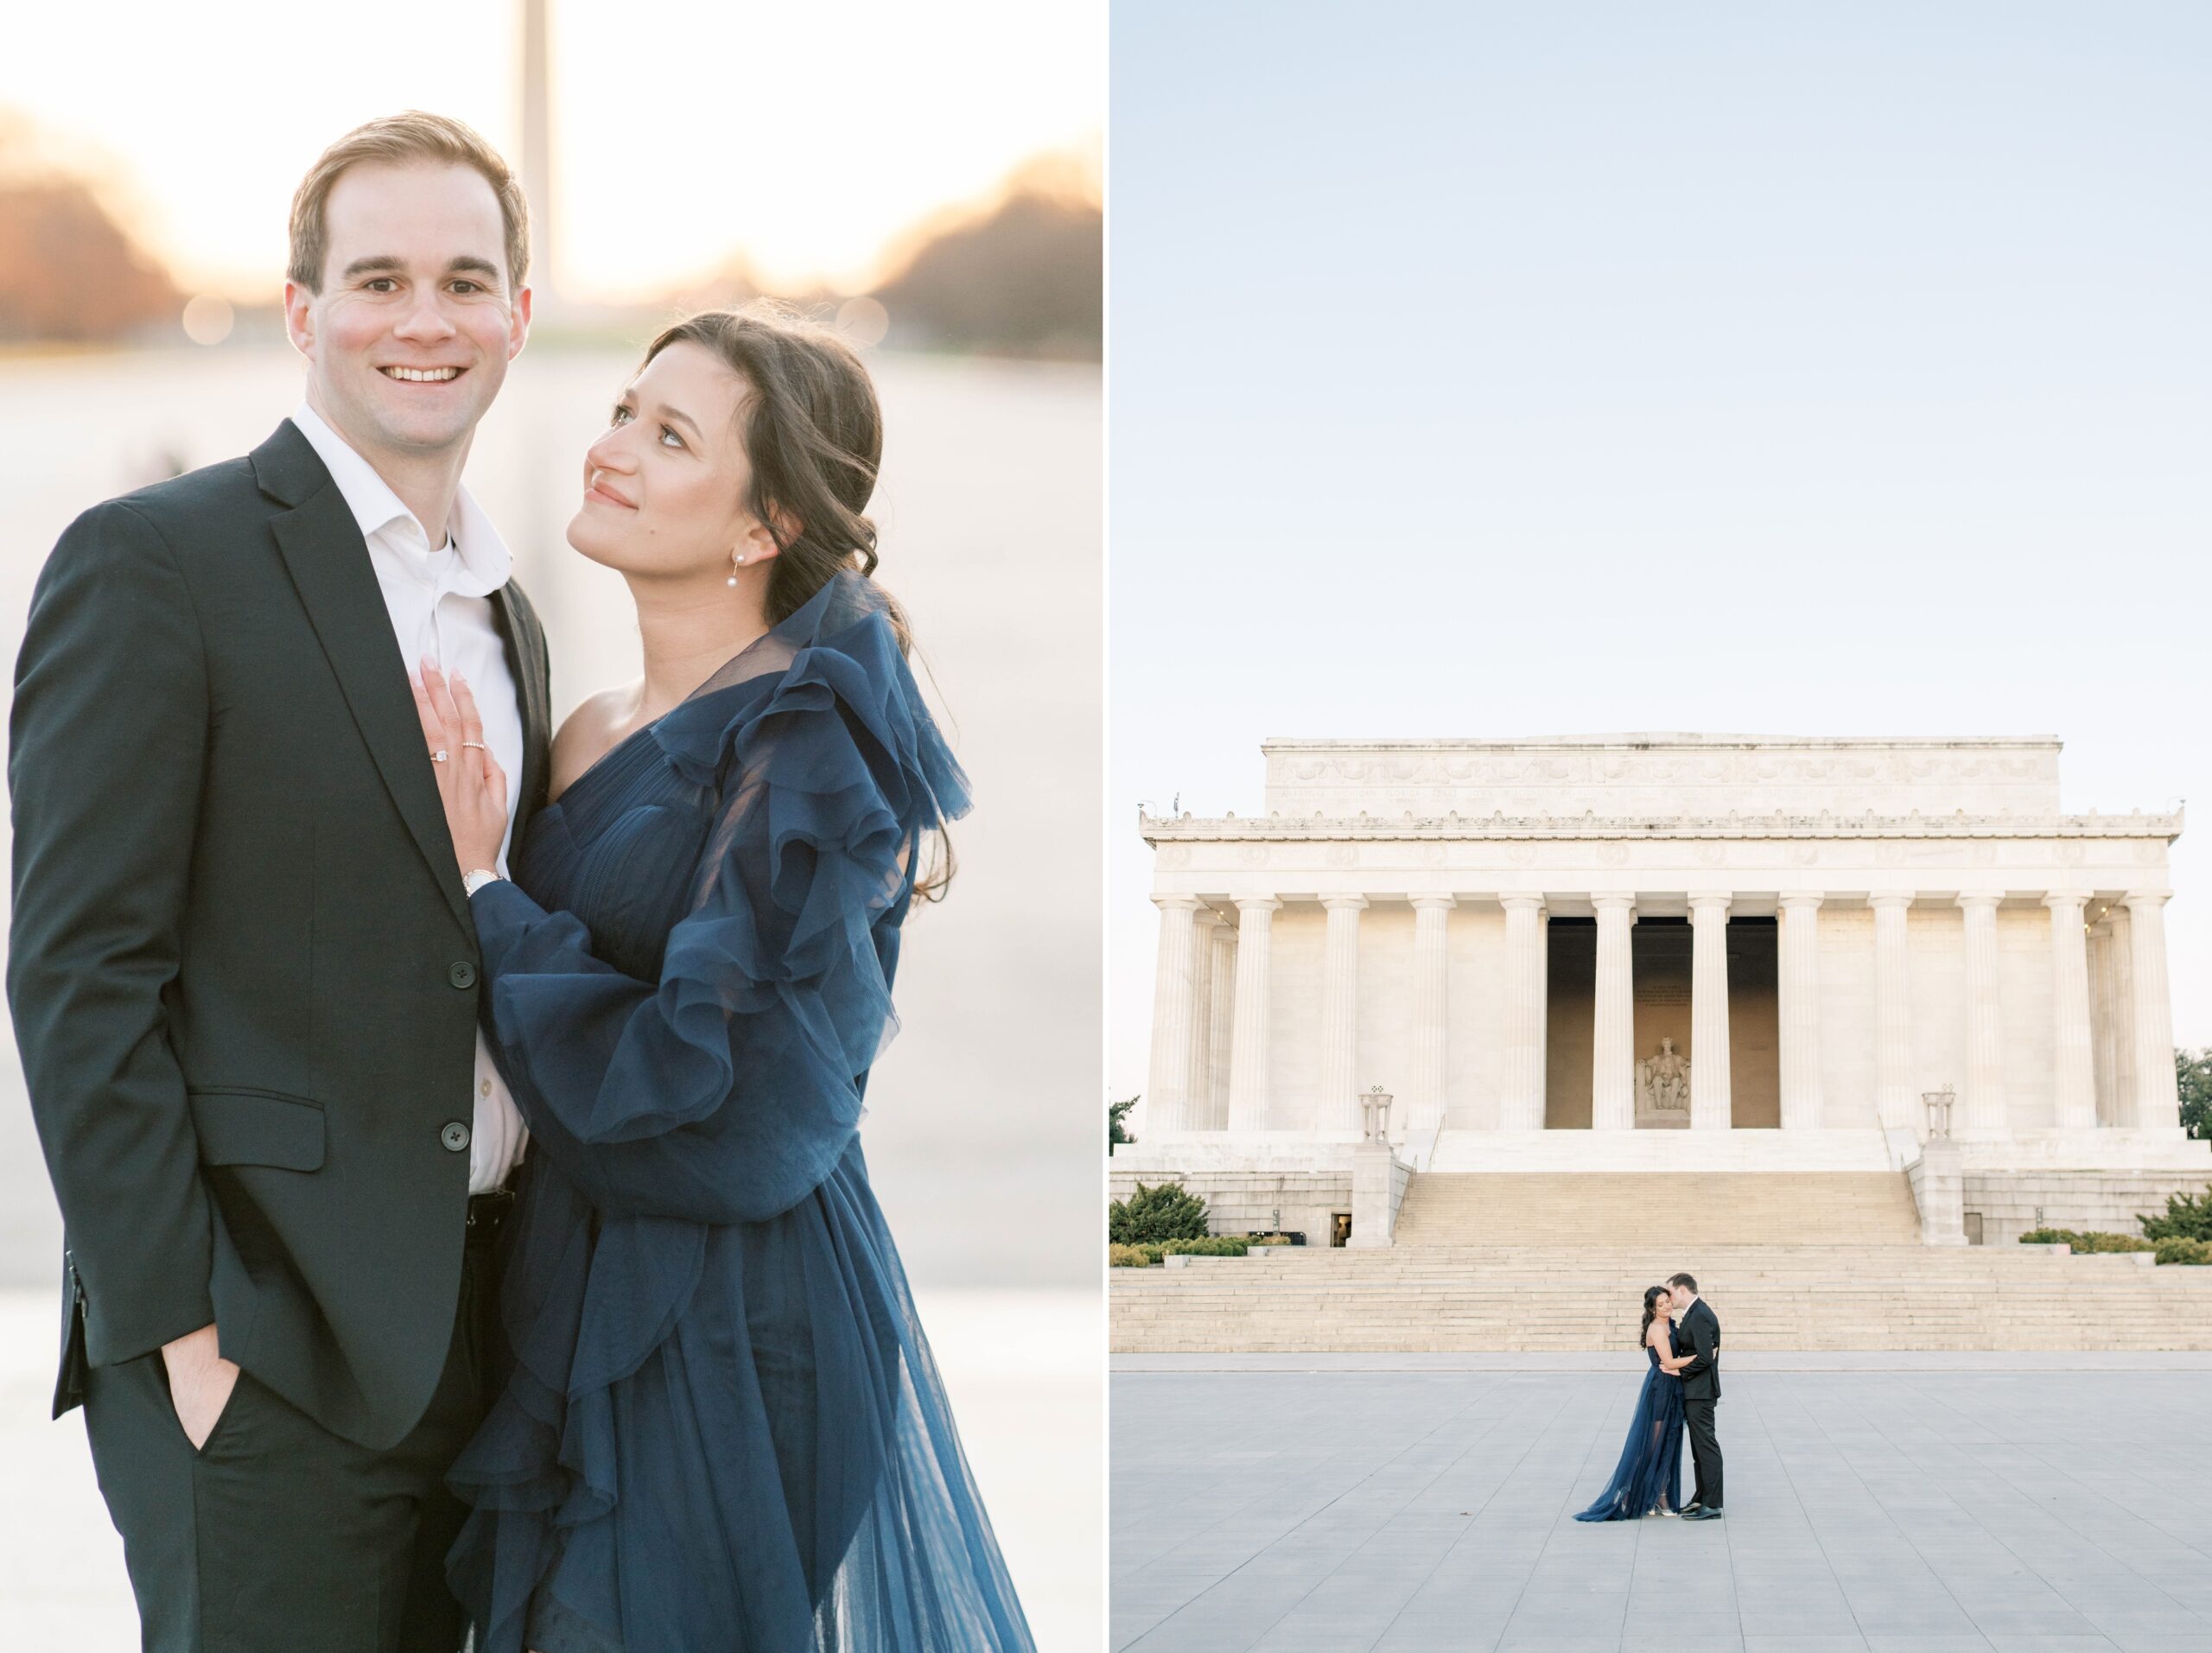 An elegant Lincoln Memorial engagement session at sunrise in Washington, DC.